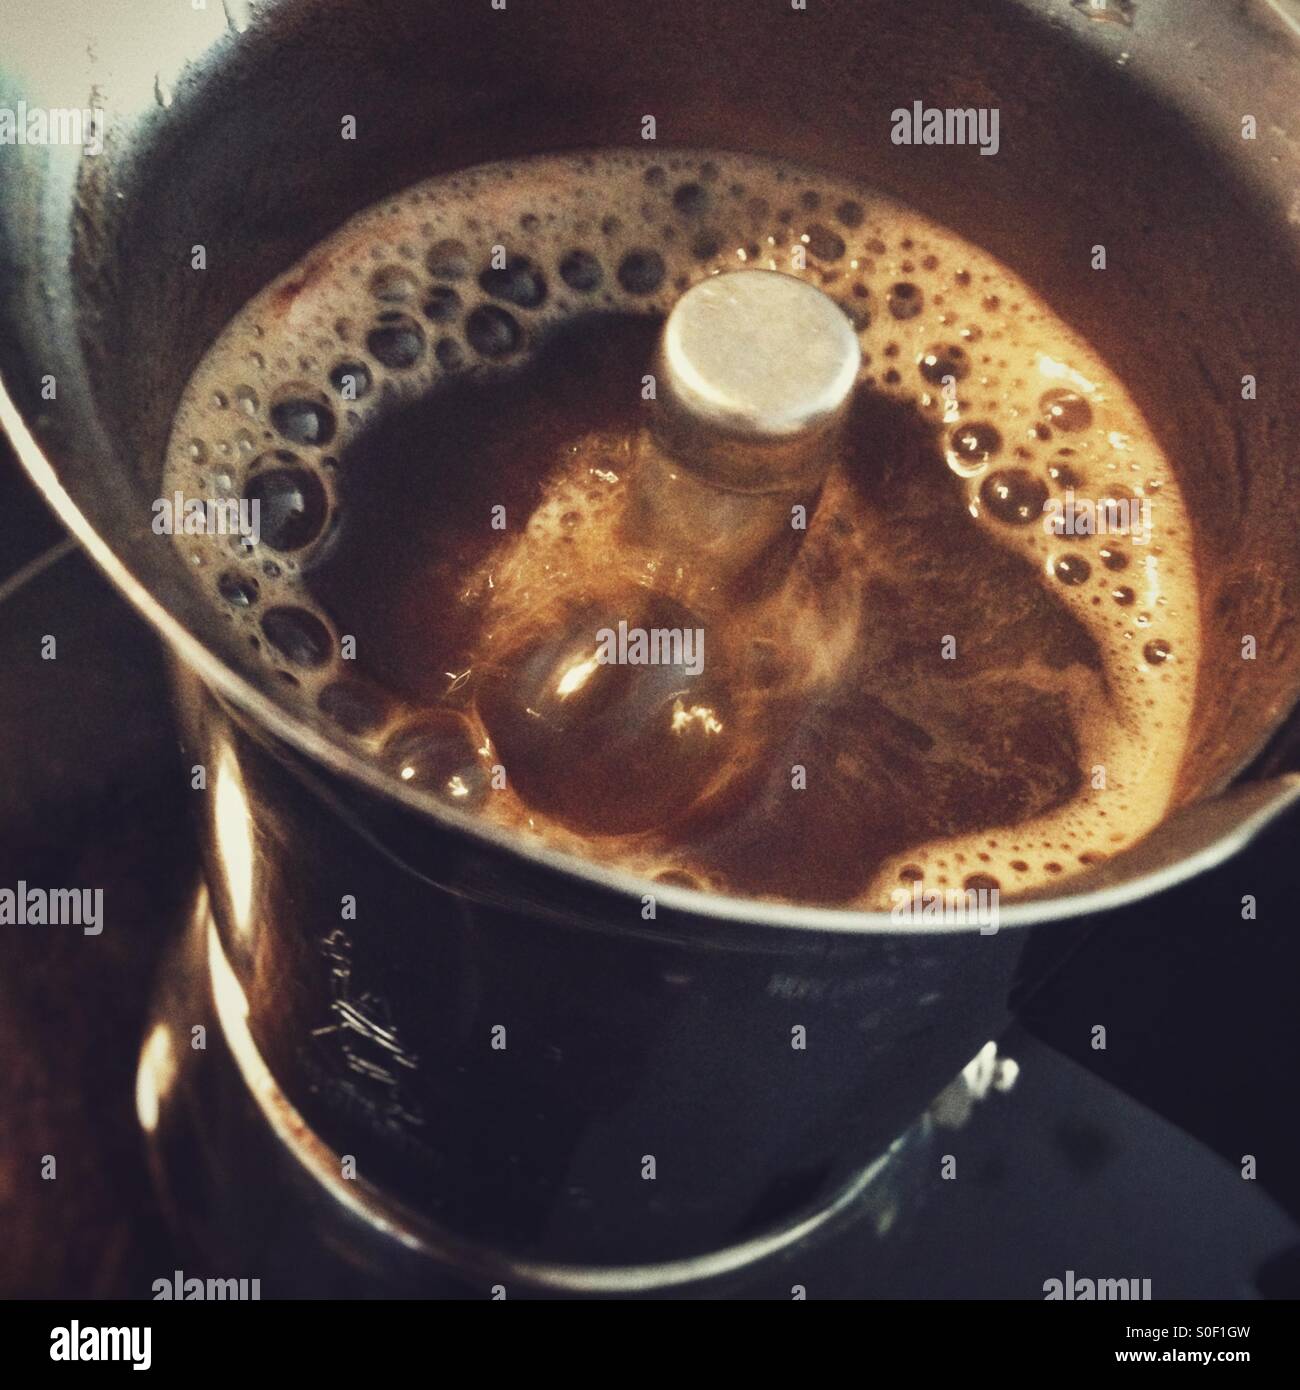 Fresh, hot, steaming espresso in an Italian Coffee Maker with Bubbles and a Rich Brown Colour Stock Photo